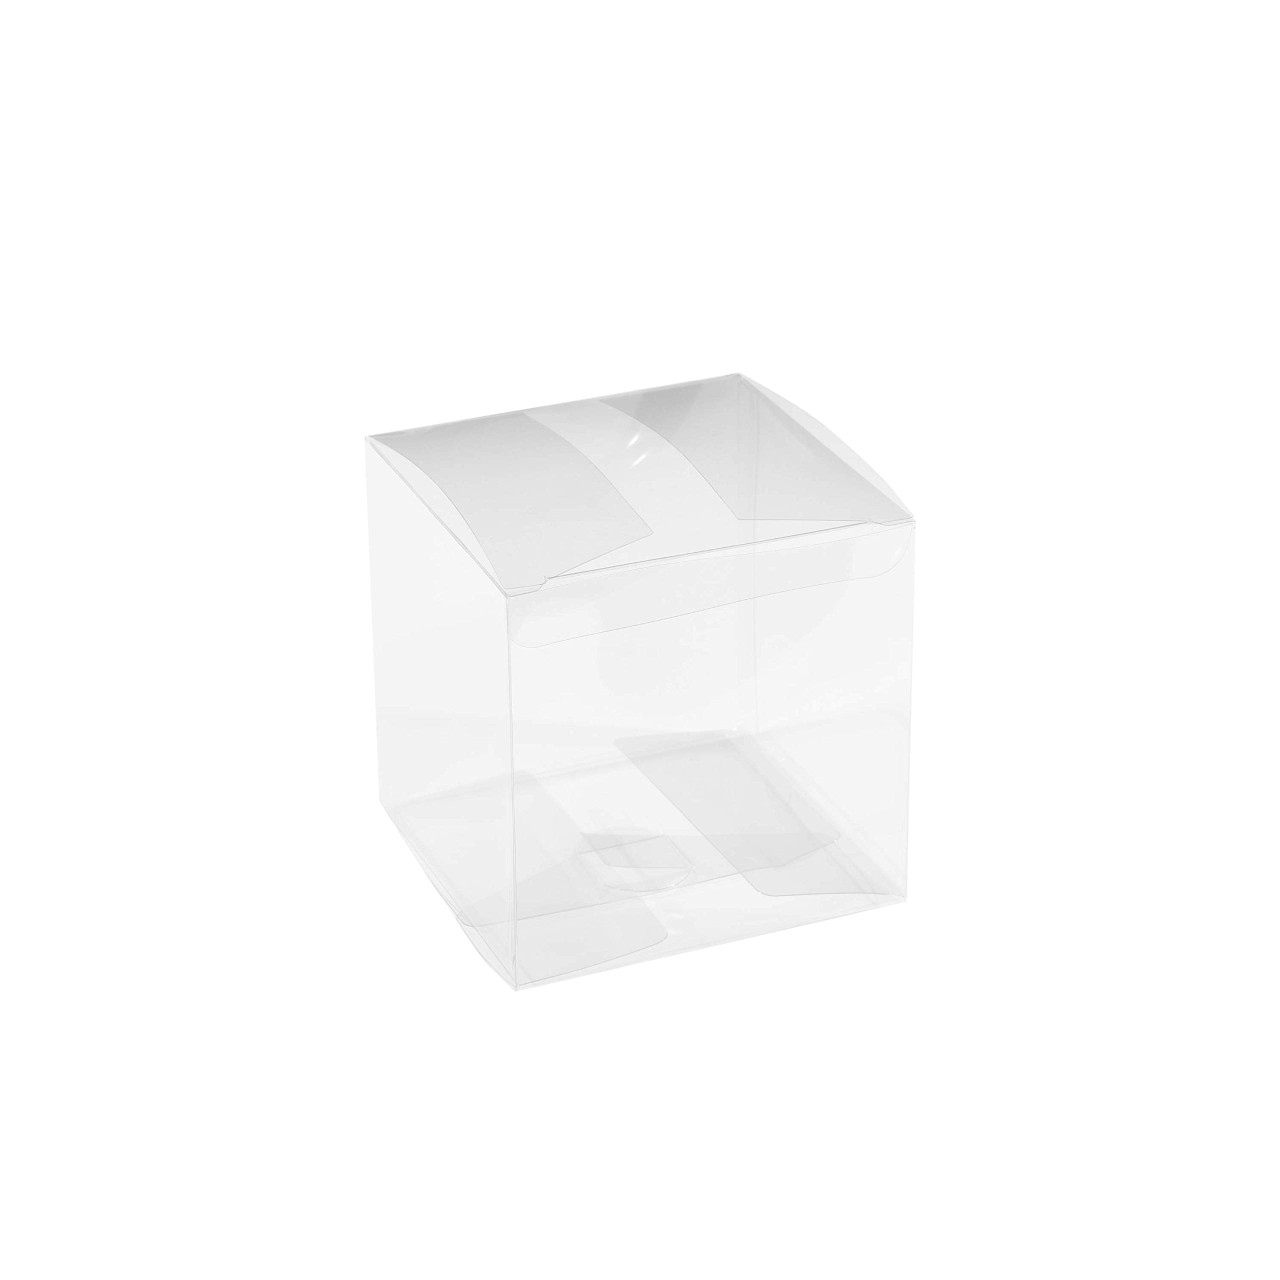 4x4x4 clear boxes